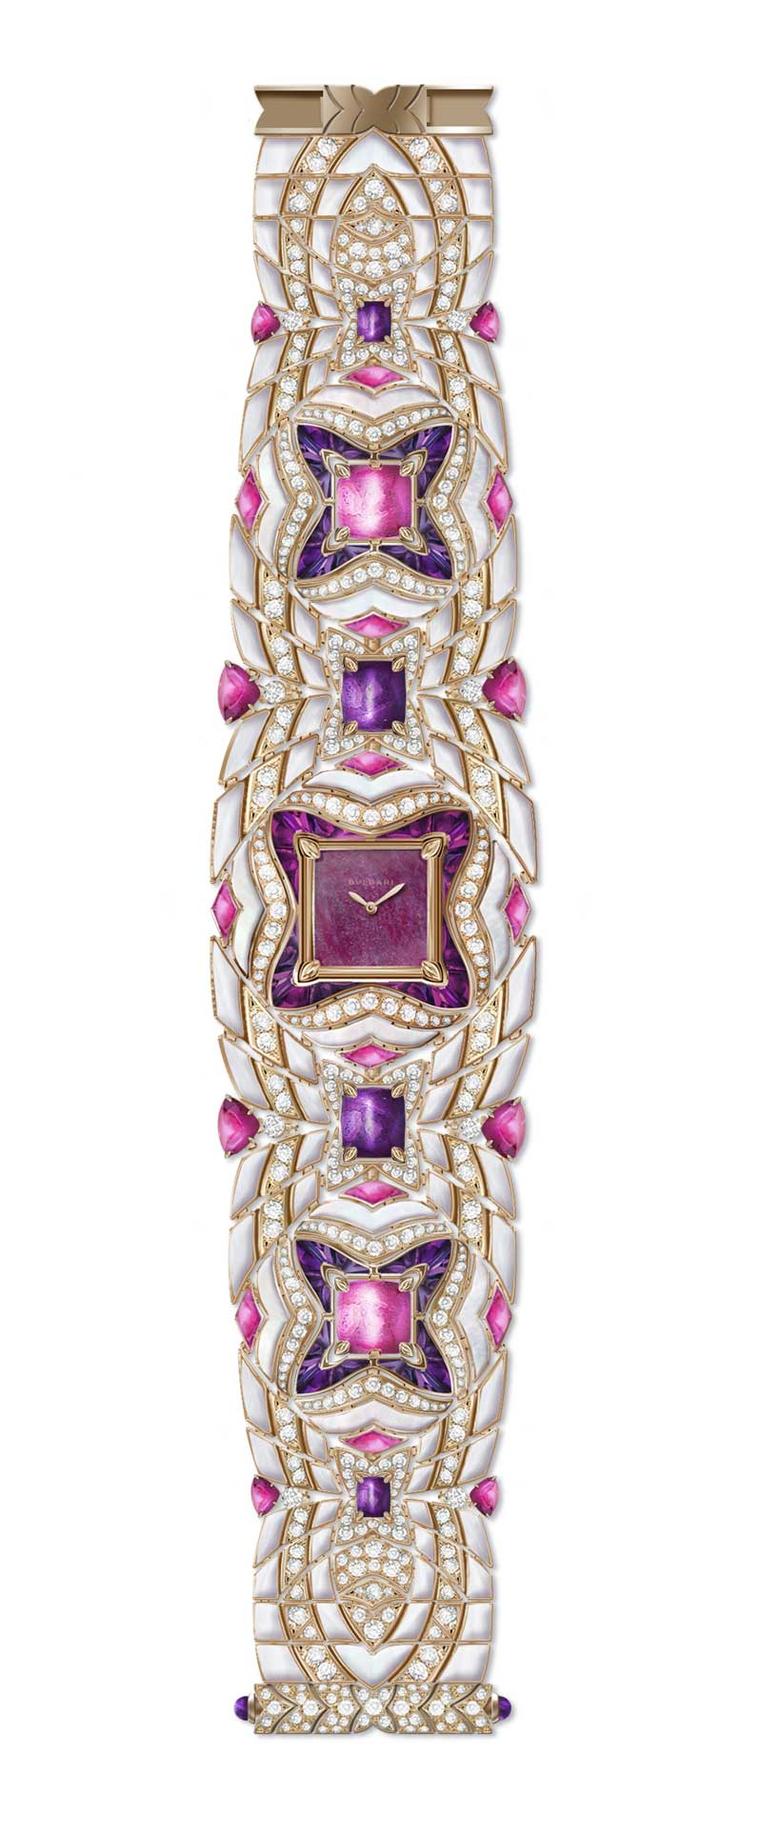 Bulgari's Mvsa high jewellery watch in rose gold features a ruby heart dial and a fabulous bracelet set with mother-of-pearl, 350 brilliant-cut diamonds, 56 buff-top amethysts, 4 Takhti-cut amethysts, 20 triangle-cut rubellites and 2 Takhti rubellites.